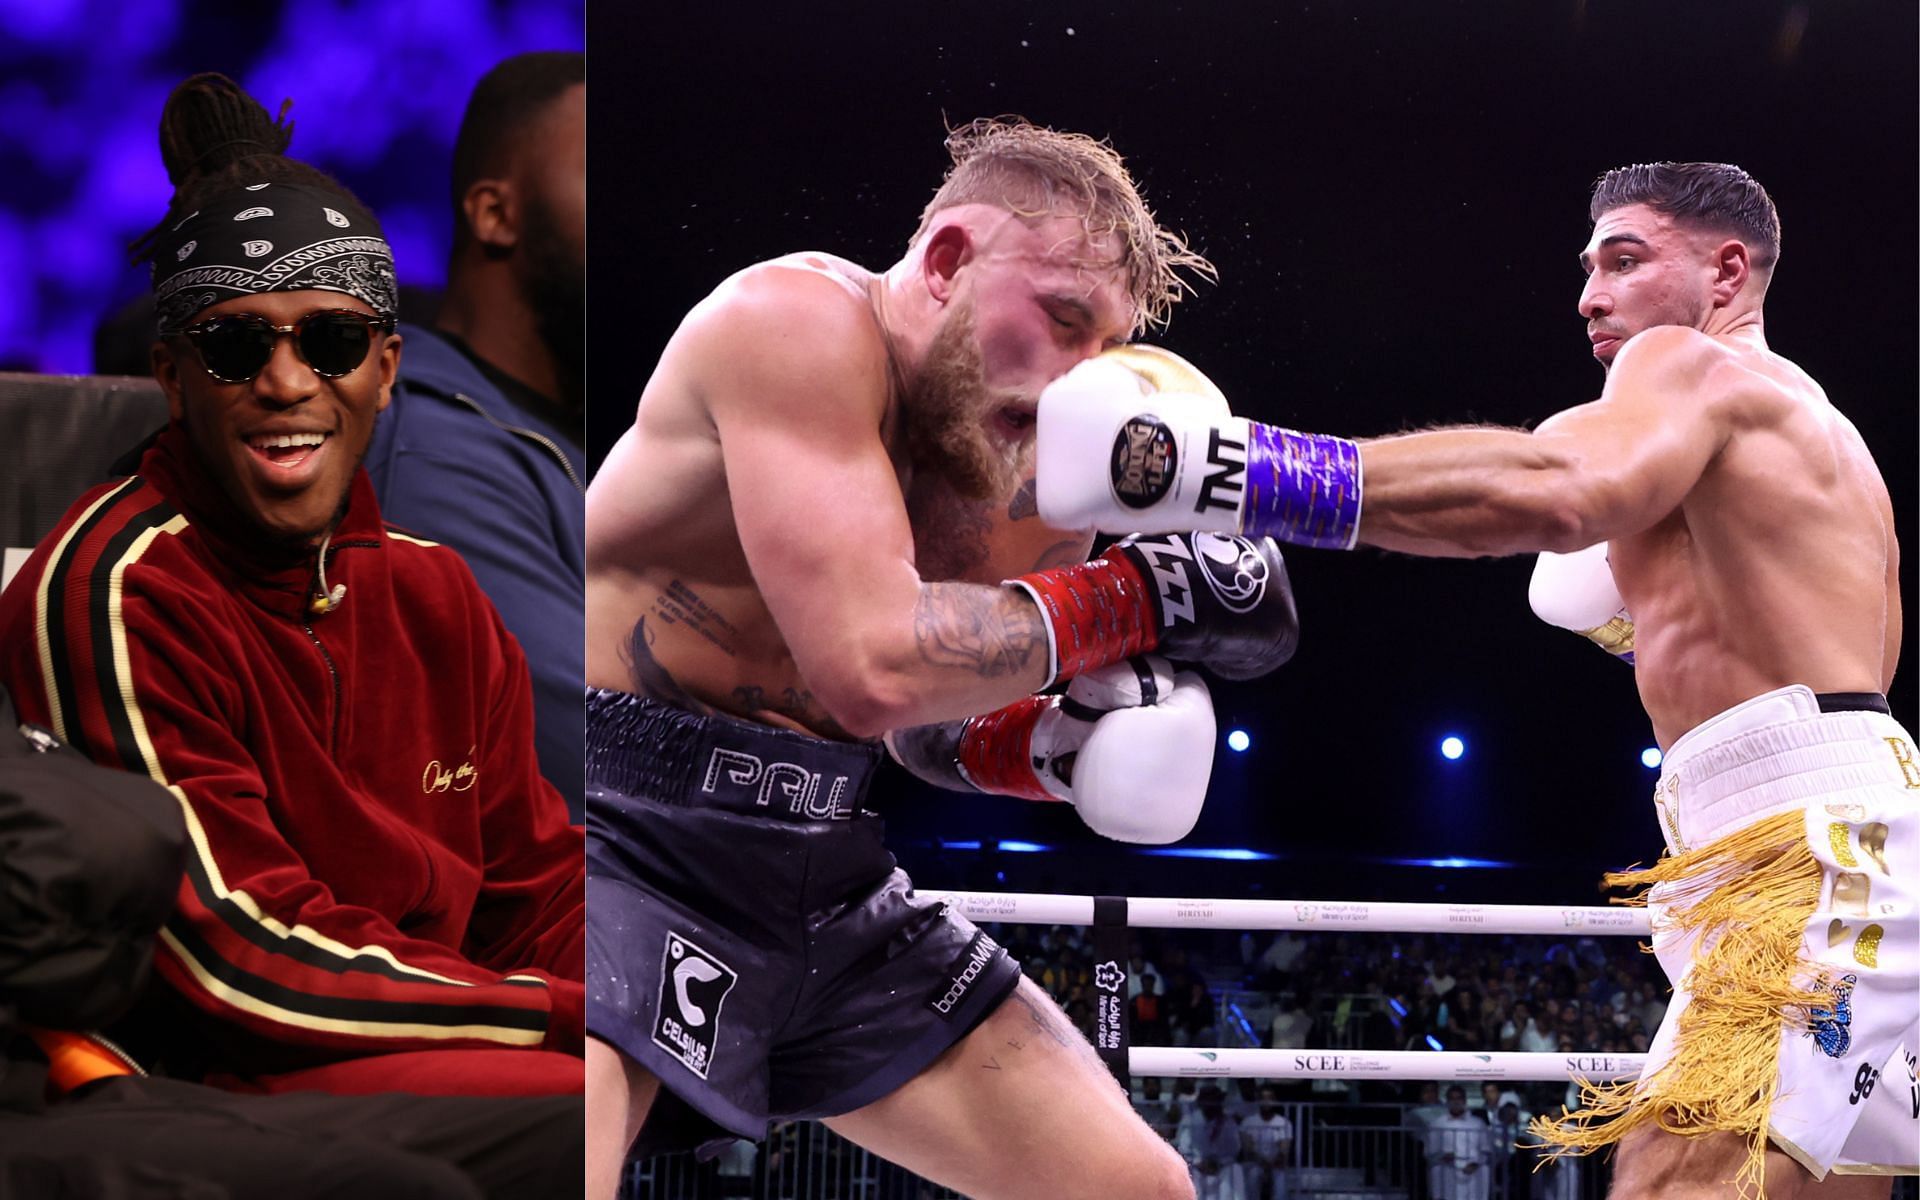 KSI (left) and Tommy Fury vs. Jake Paul (right) (Image credits Getty Images)